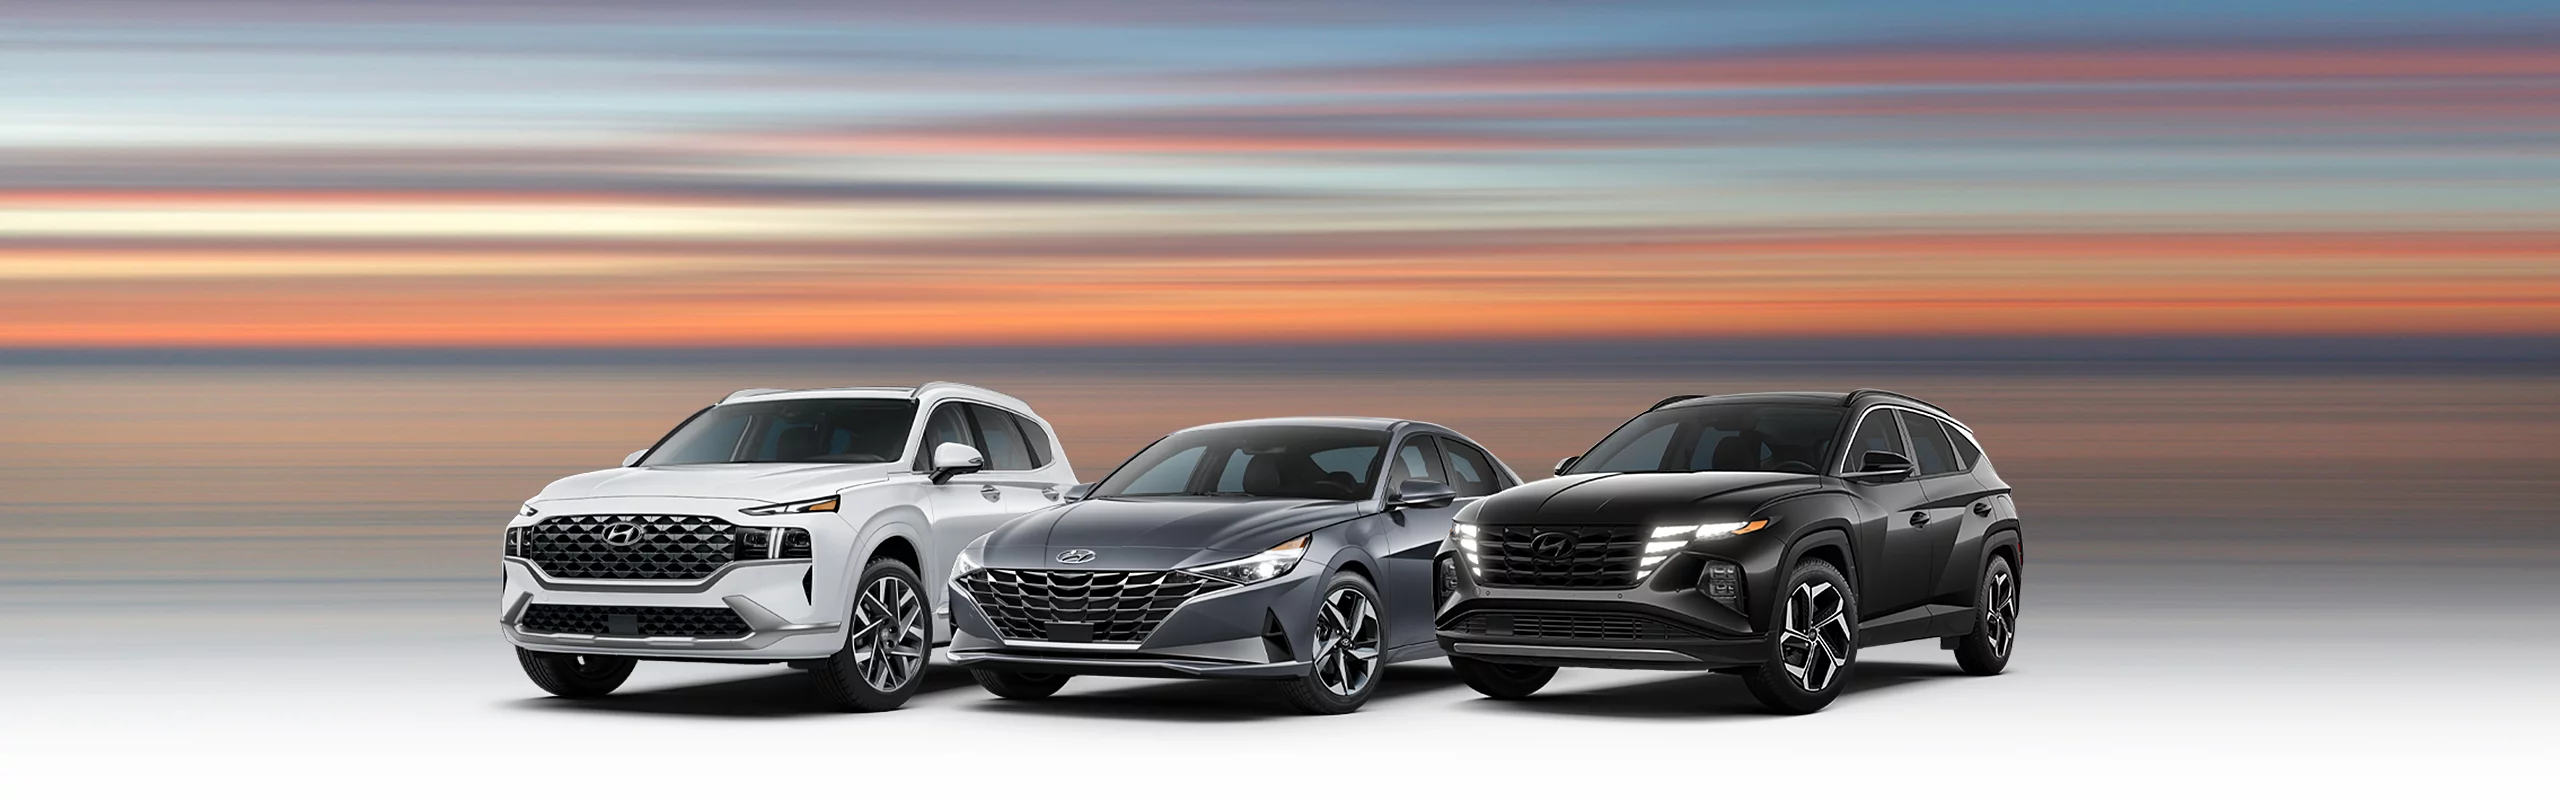 Hyundai Getaway Sales Event - see offers